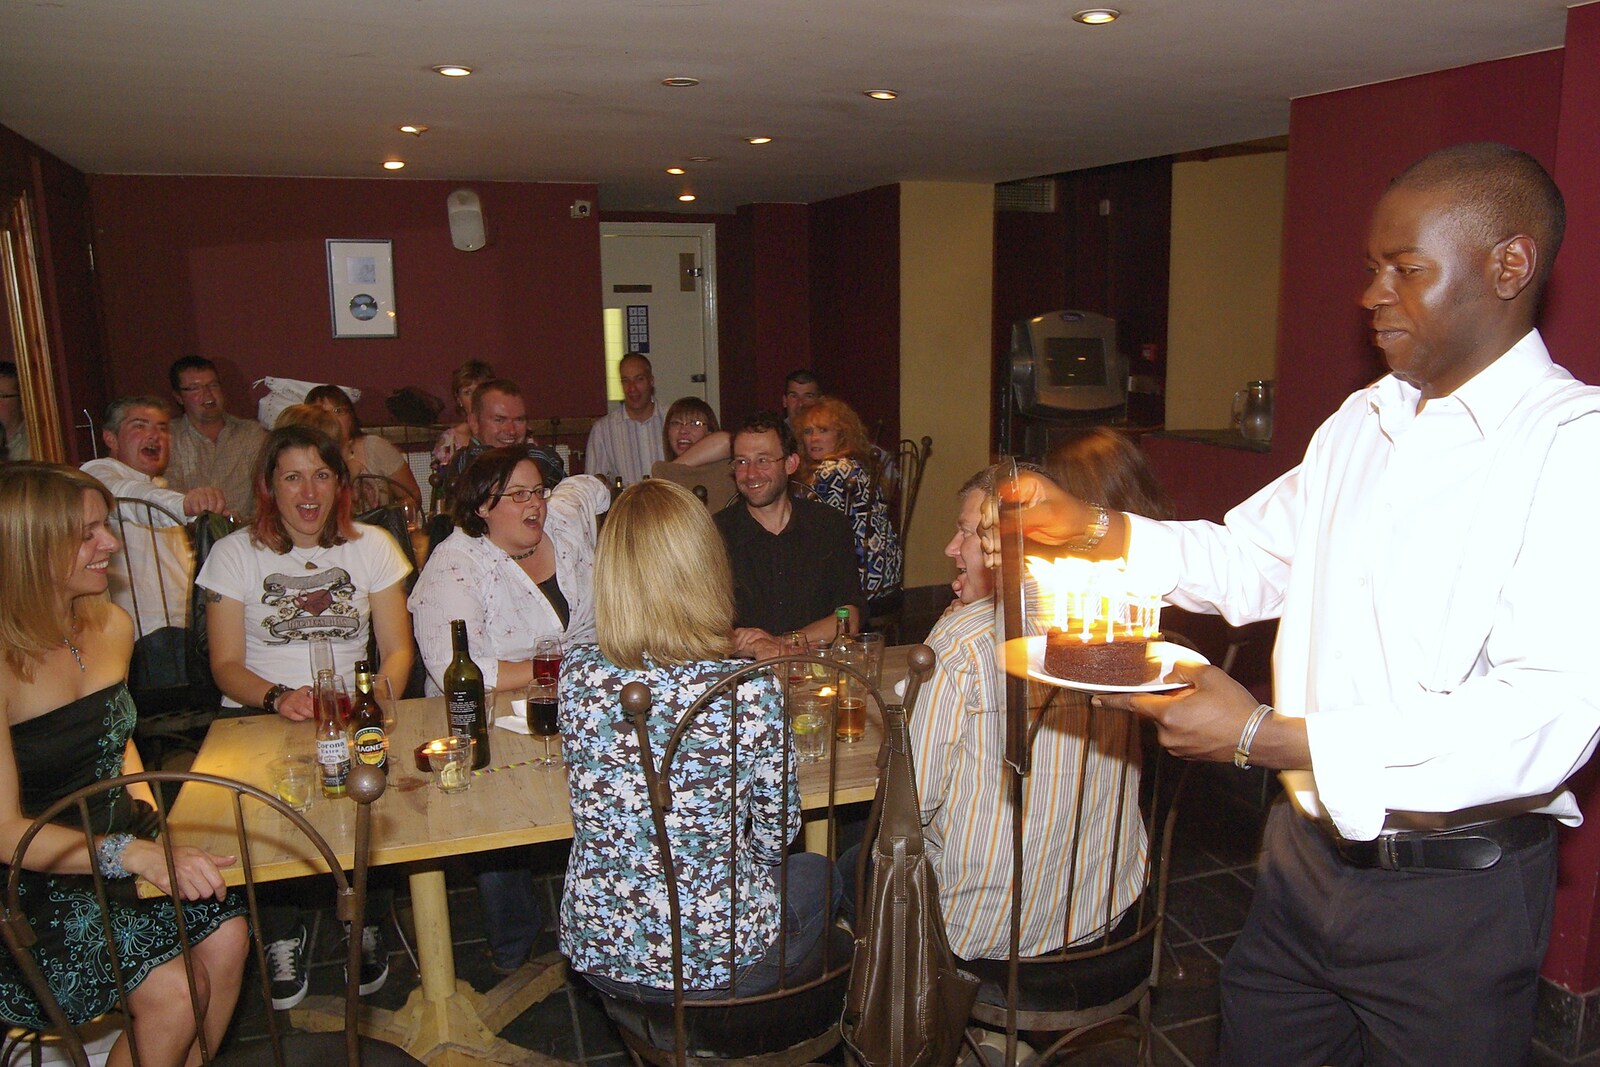 Janet's 40th, The Depot, Cambridge - 1st September 2007: A waiter brings in a birthday cake